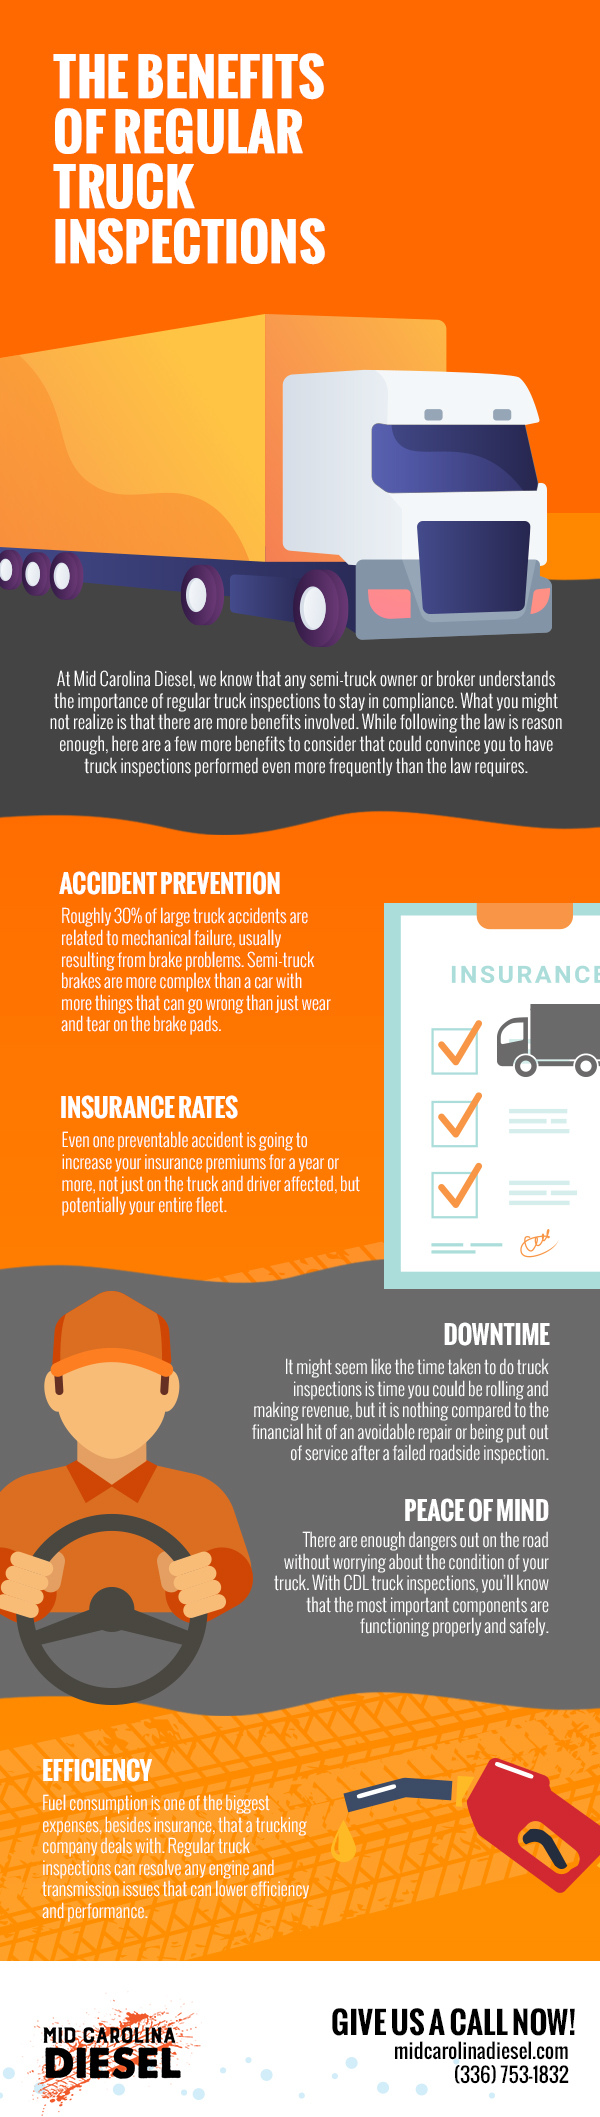 The Benefits of Regular Truck Inspections [infographic]